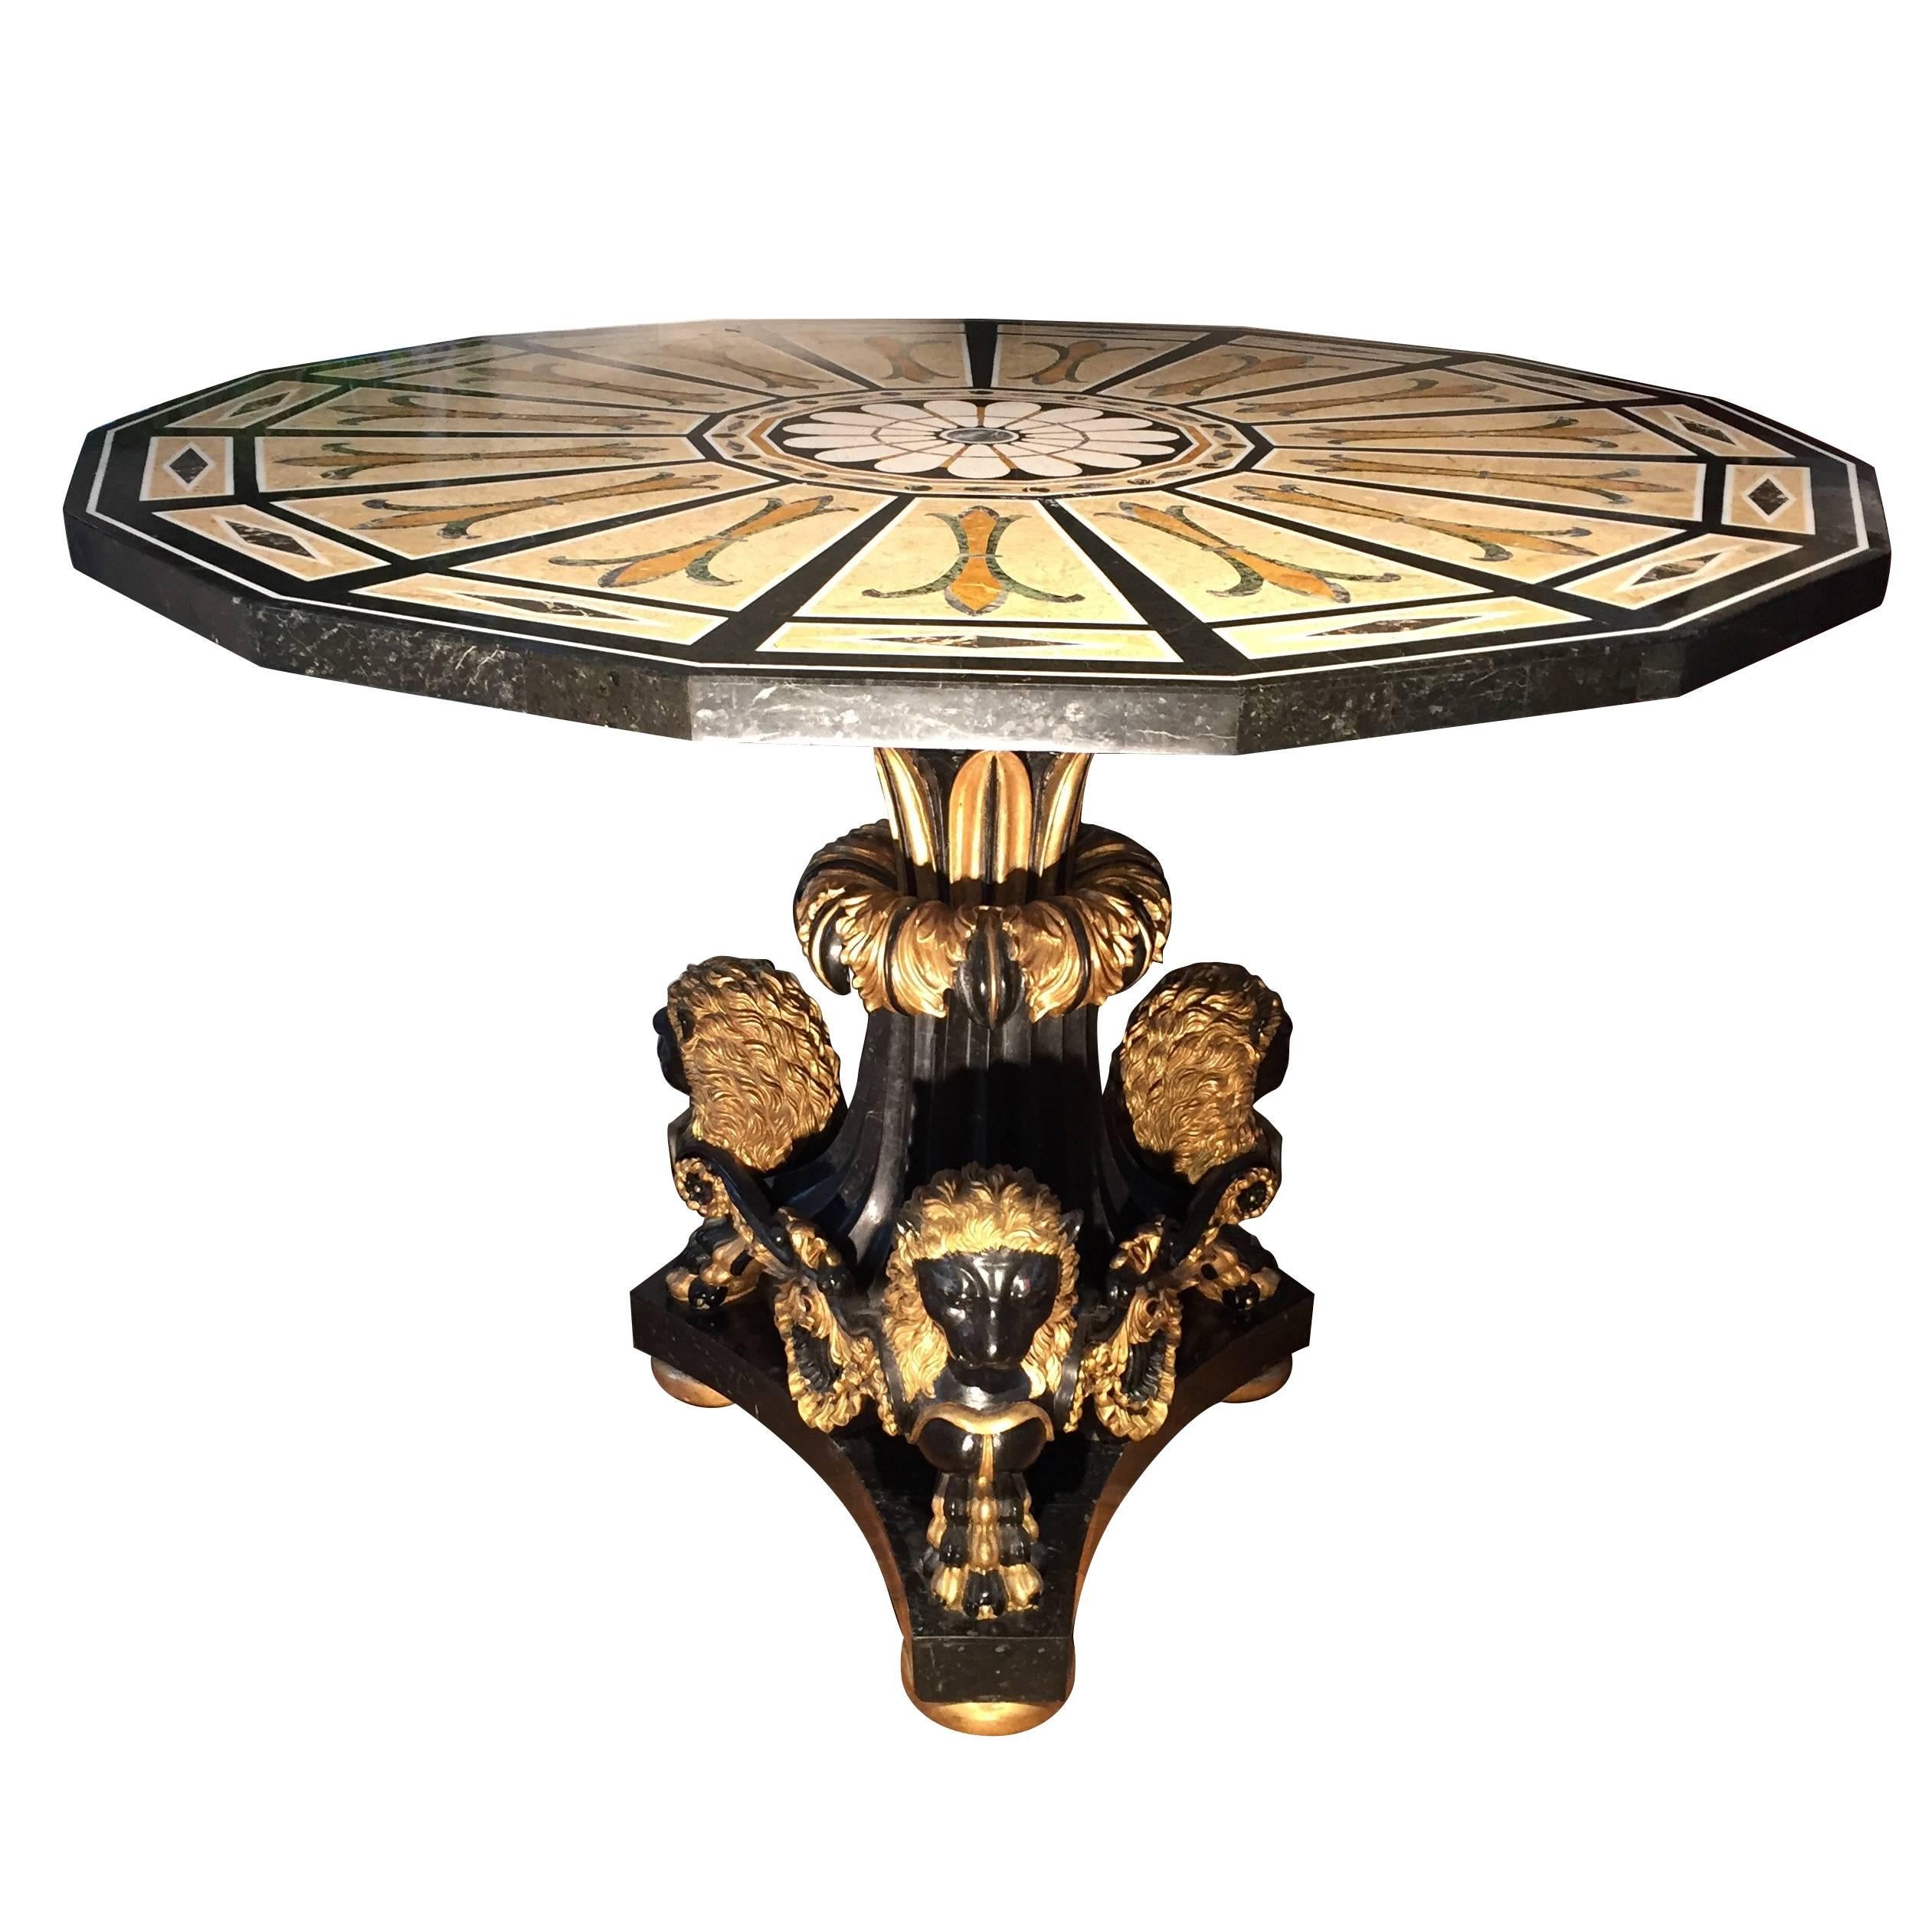 The top of this Pieta Dura Marble Table consists of multiple specimen of marble in ochre, beige and green tones contrasted by outlines in black Onyx and white marble. The base too is veneered in black marble with exception of the gilt Lion Heads and